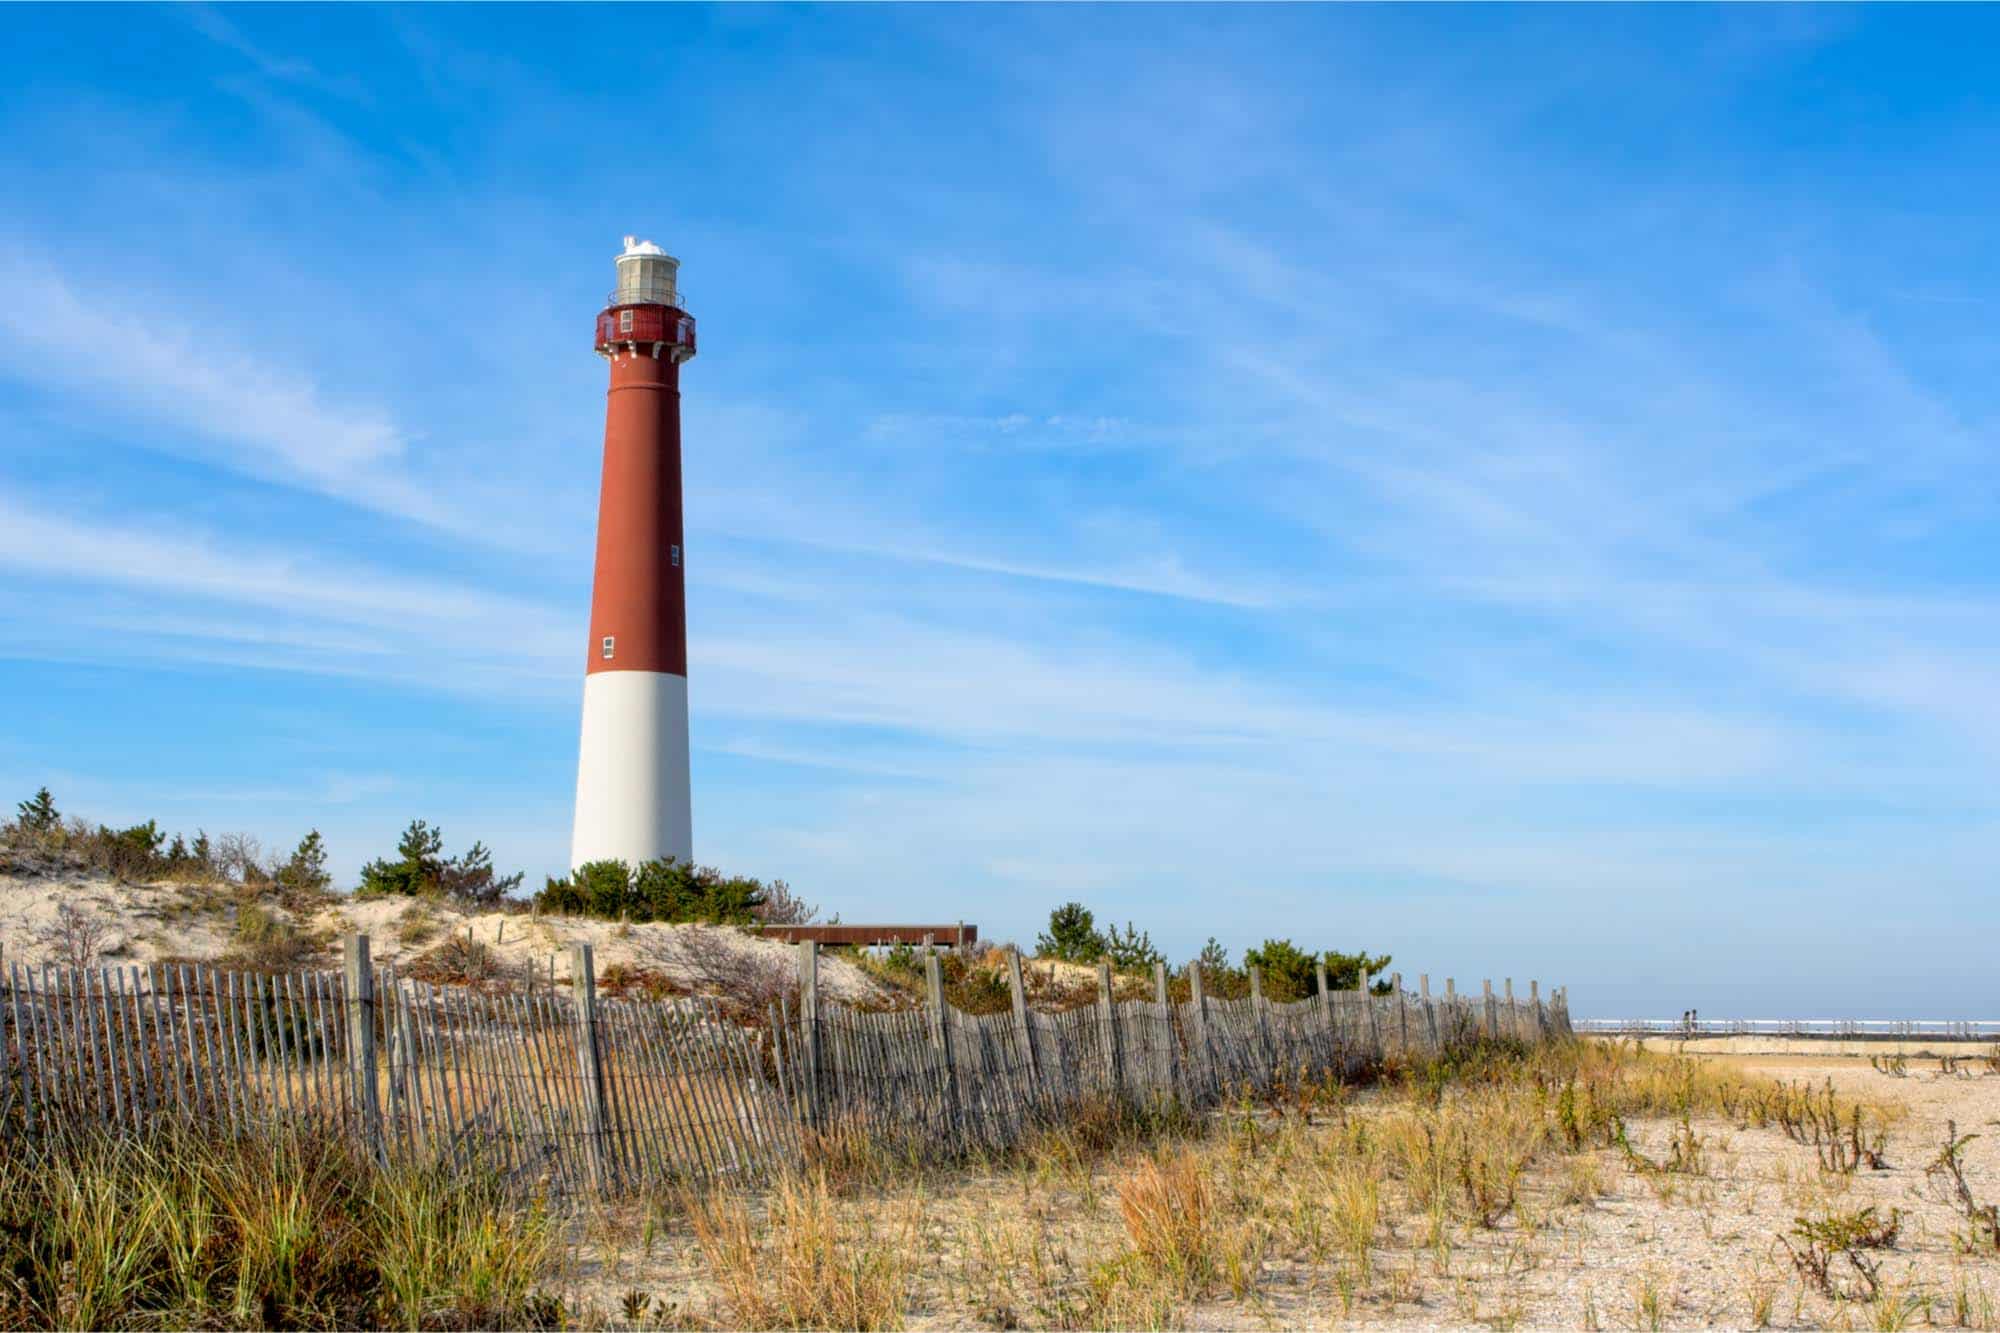 Red and white lighthouse above a sandy beach